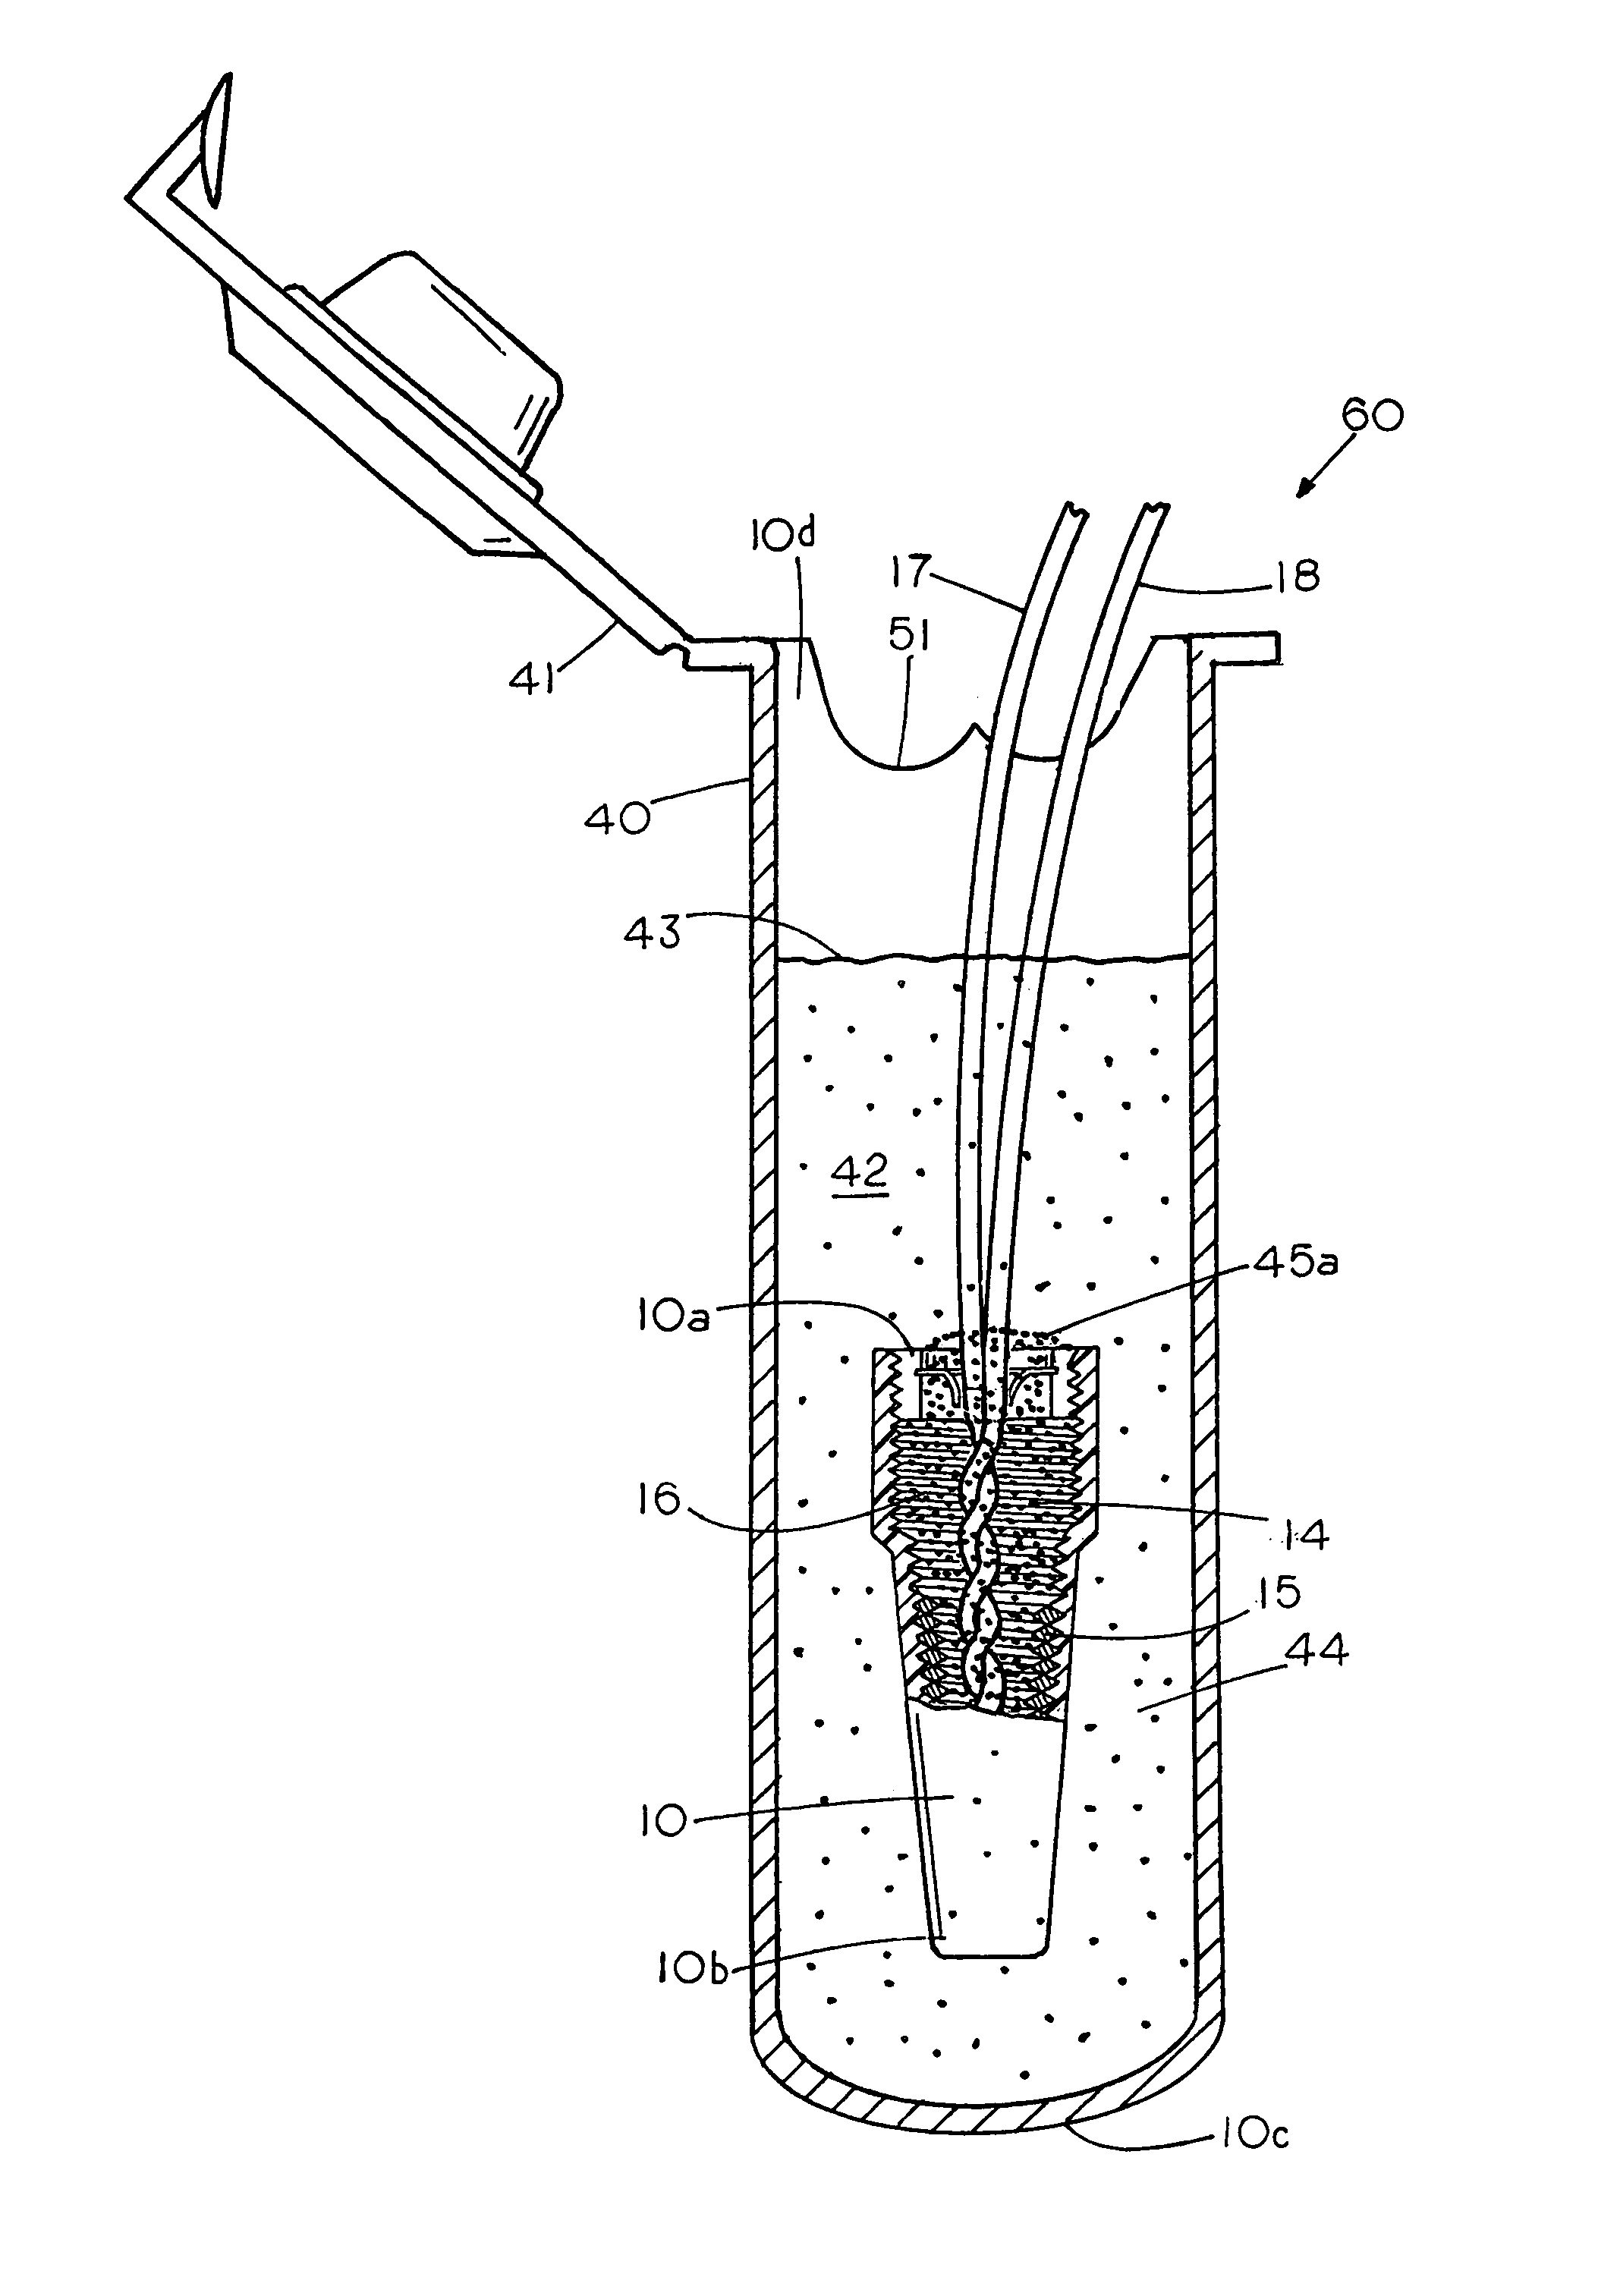 Two sealant two phase wire connector